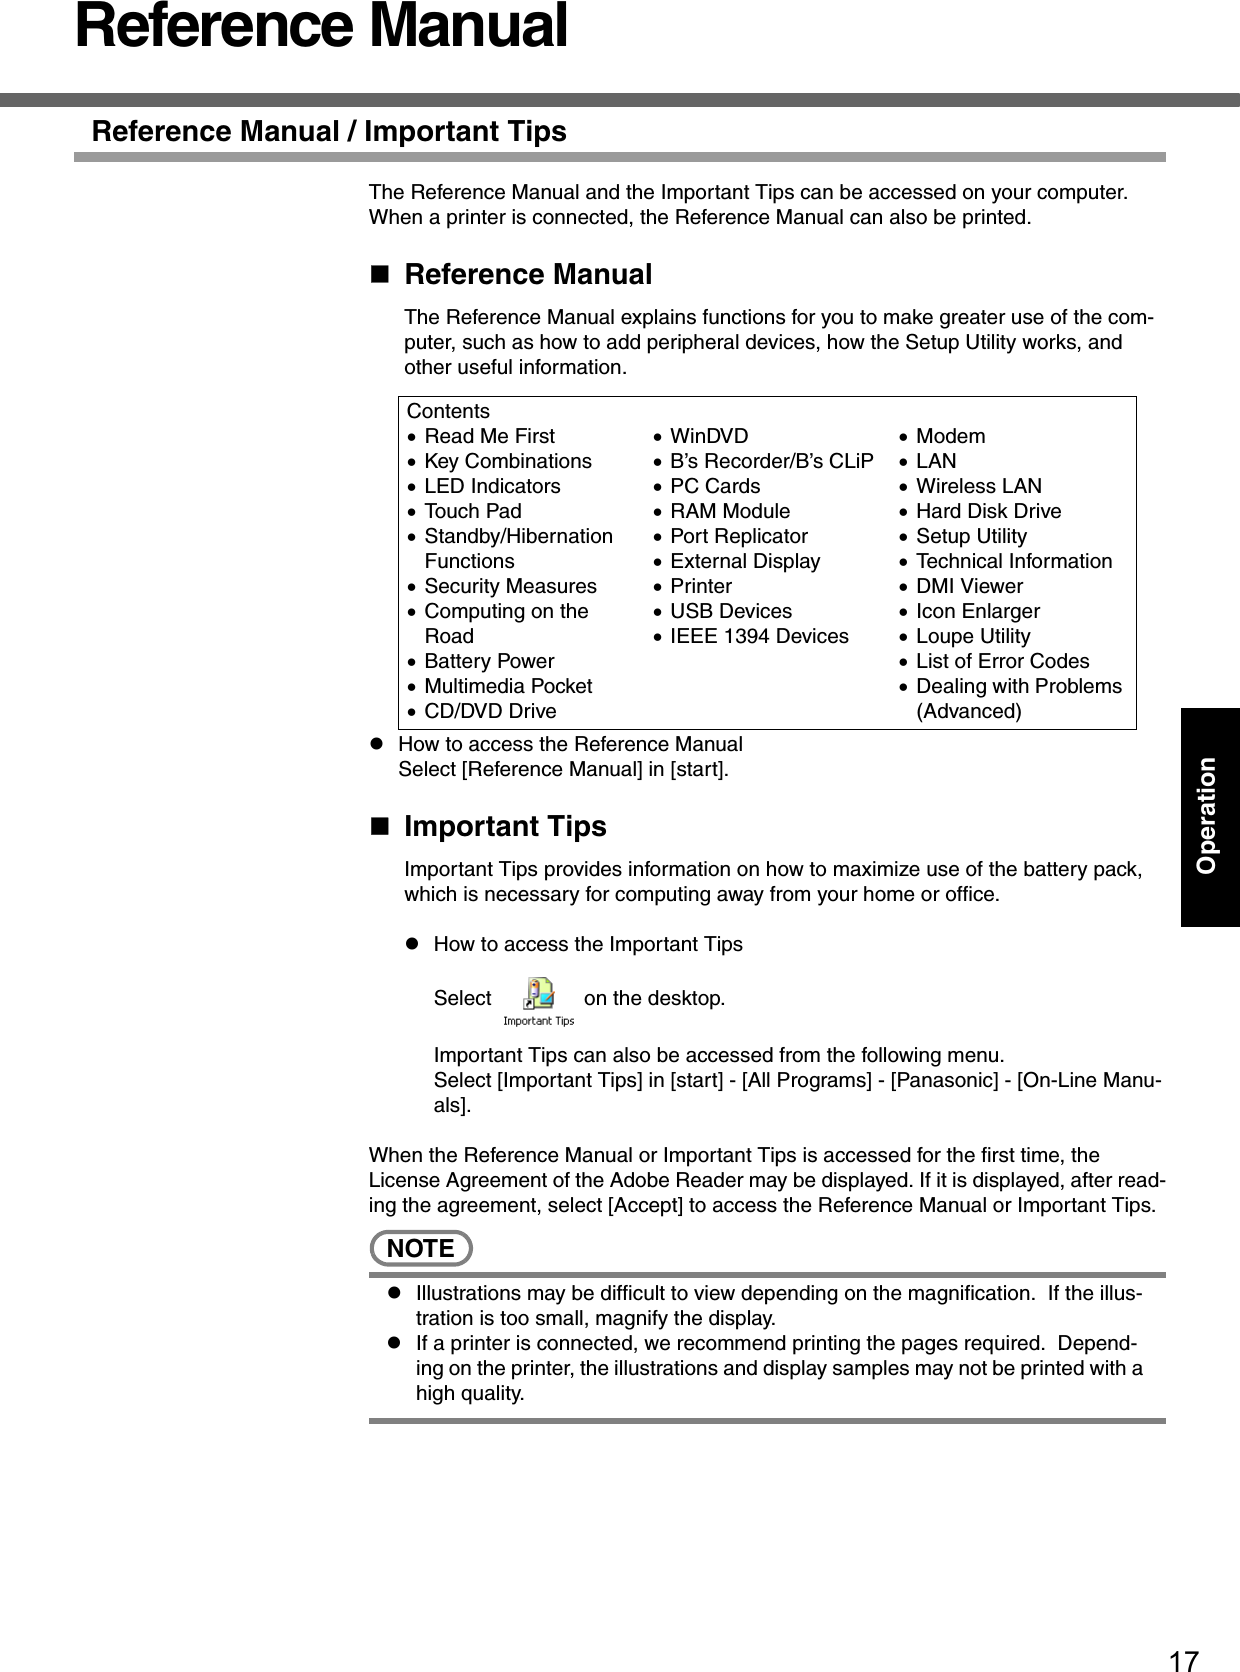 17OperationReference ManualReference Manual / Important TipsThe Reference Manual and the Important Tips can be accessed on your computer.  When a printer is connected, the Reference Manual can also be printed.Reference ManualThe Reference Manual explains functions for you to make greater use of the com-puter, such as how to add peripheral devices, how the Setup Utility works, and other useful information.zHow to access the Reference ManualSelect [Reference Manual] in [start].Important TipsImportant Tips provides information on how to maximize use of the battery pack, which is necessary for computing away from your home or office.zHow to access the Important TipsSelect   on the desktop.Important Tips can also be accessed from the following menu.Select [Important Tips] in [start] - [All Programs] - [Panasonic] - [On-Line Manu-als].When the Reference Manual or Important Tips is accessed for the first time, the License Agreement of the Adobe Reader may be displayed. If it is displayed, after read-ing the agreement, select [Accept] to access the Reference Manual or Important Tips.NOTEzIllustrations may be difficult to view depending on the magnification.  If the illus-tration is too small, magnify the display.zIf a printer is connected, we recommend printing the pages required.  Depend-ing on the printer, the illustrations and display samples may not be printed with a high quality.Contents•Read Me First •Key Combinations•LED Indicators•Touch Pad•Standby/Hibernation Functions•Security Measures•Computing on the Road•Battery Power•Multimedia Pocket•CD/DVD Drive•WinDVD•B’s Recorder/B’s CLiP•PC Cards•RAM Module•Port Replicator•External Display•Printer•USB Devices•IEEE 1394 Devices•Modem•LAN•Wireless LAN•Hard Disk Drive•Setup Utility•Technical Information•DMI Viewer•Icon Enlarger•Loupe Utility•List of Error Codes•Dealing with Problems (Advanced)